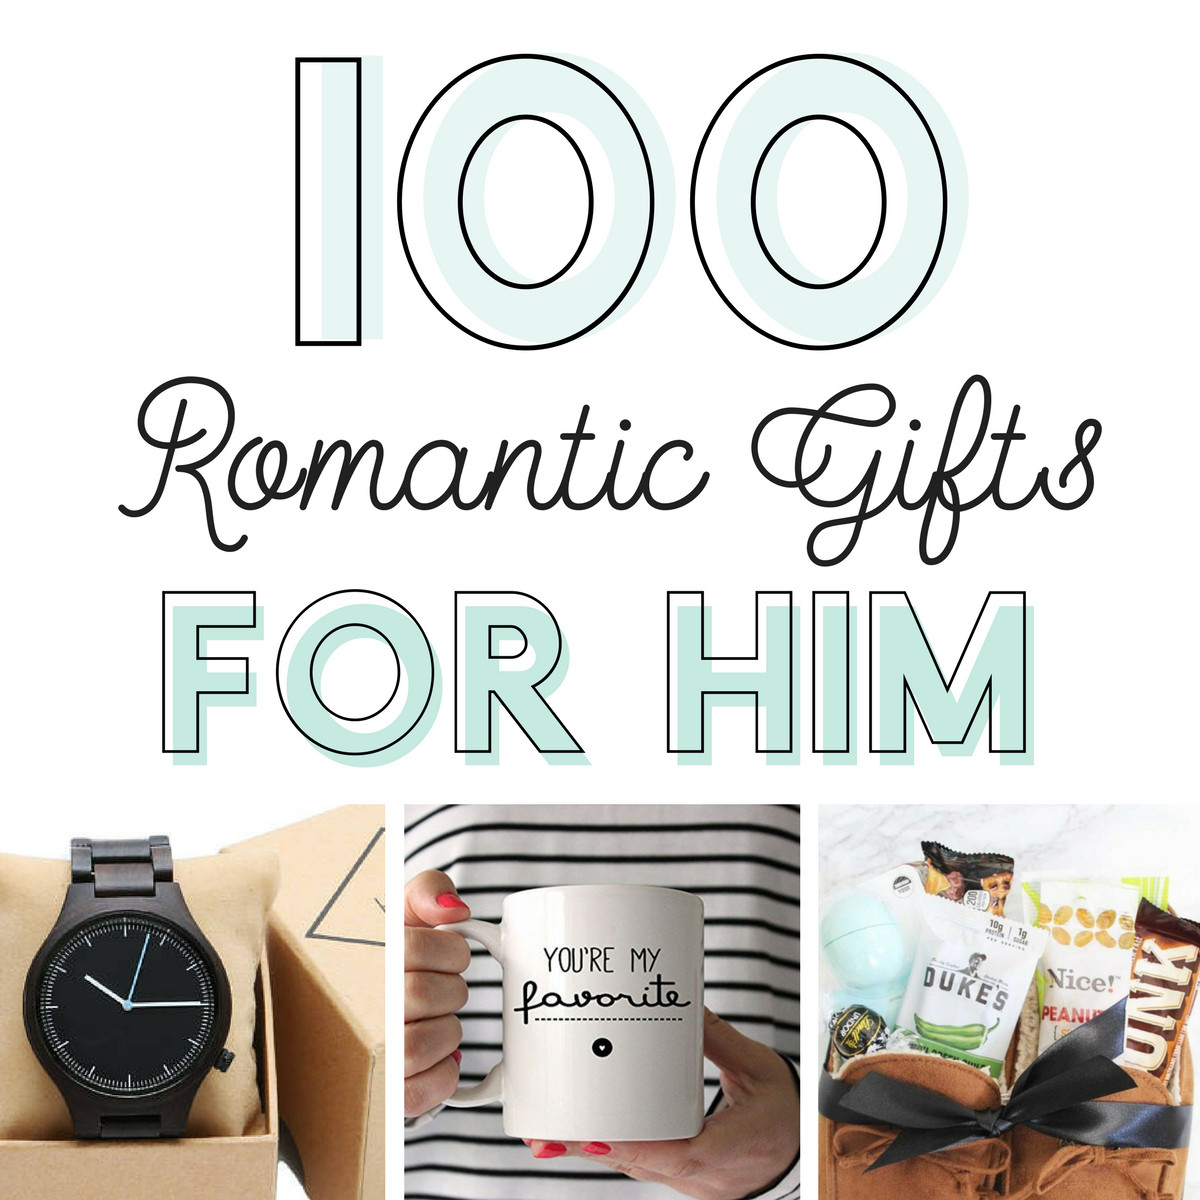 Birthday Gift For Him Ideas
 100 Romantic Gifts for Him From The Dating Divas